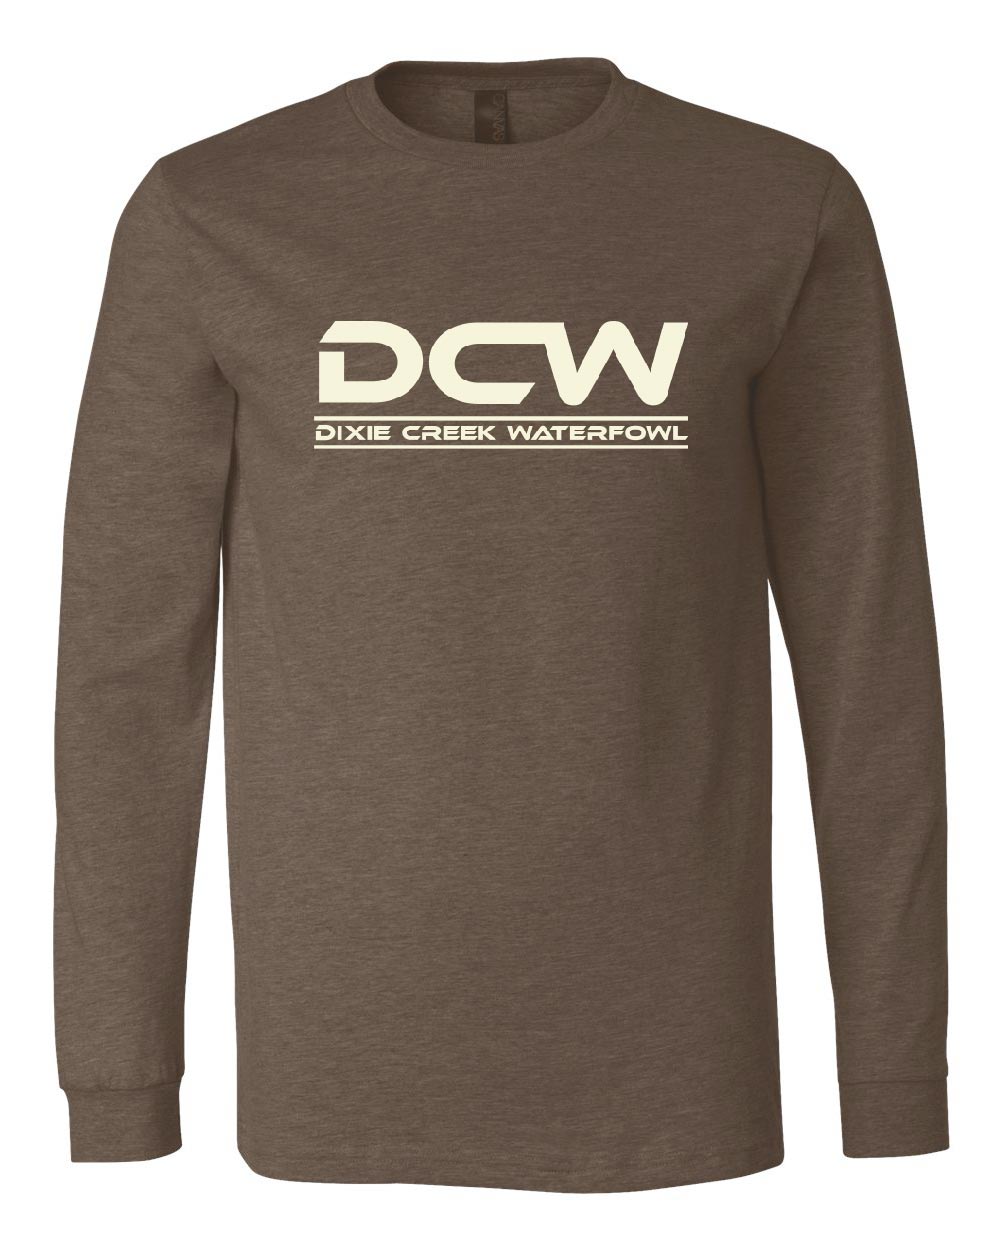 DCW Call - Heather Brown Long Sleeve